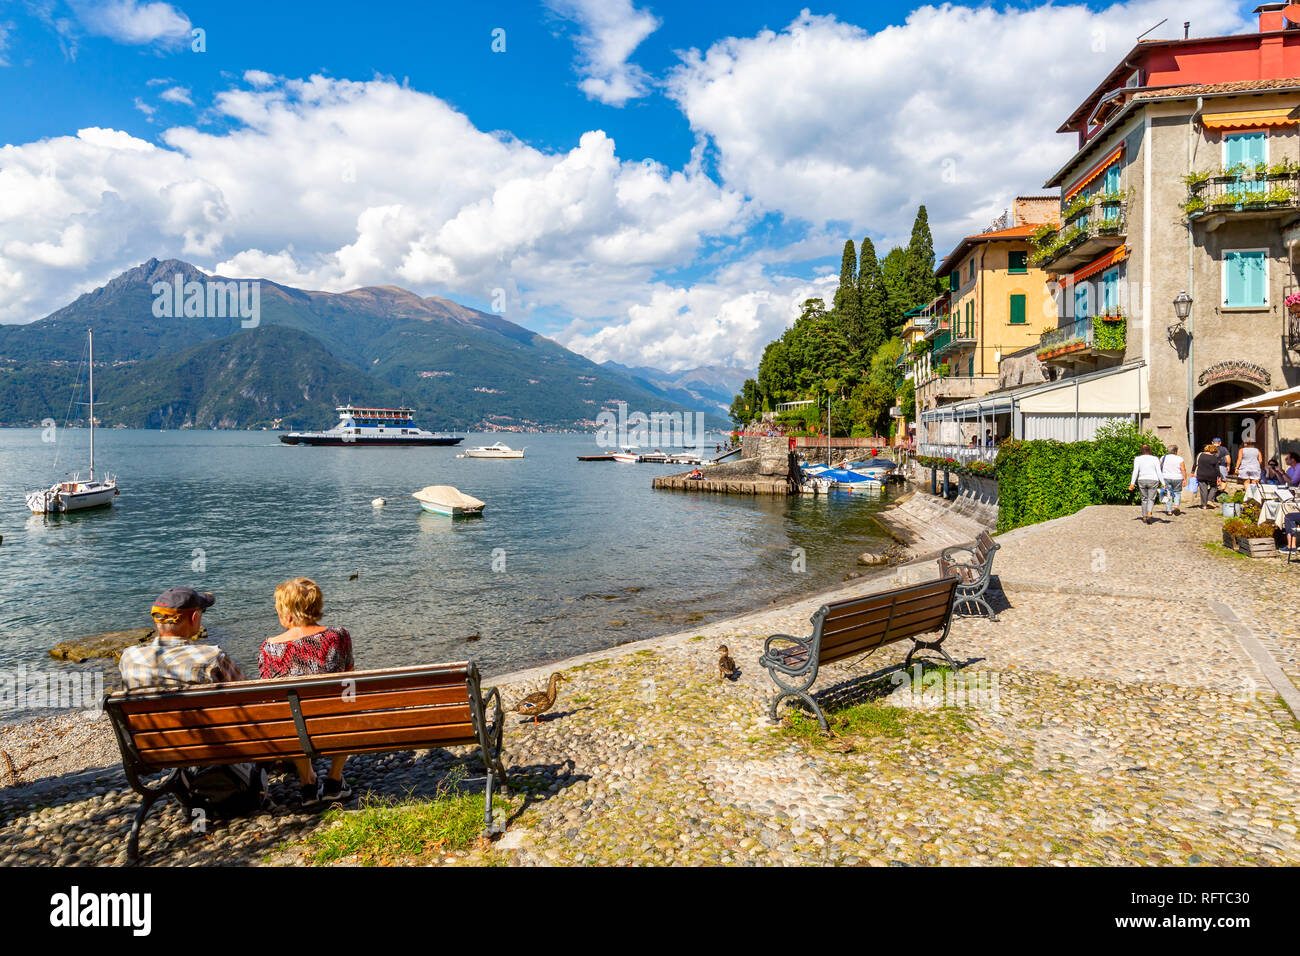 View of visitors on the lakeside in Vezio, Province of Como, Lake Como, Lombardy, Italian Lakes, Italy, Europe Stock Photo